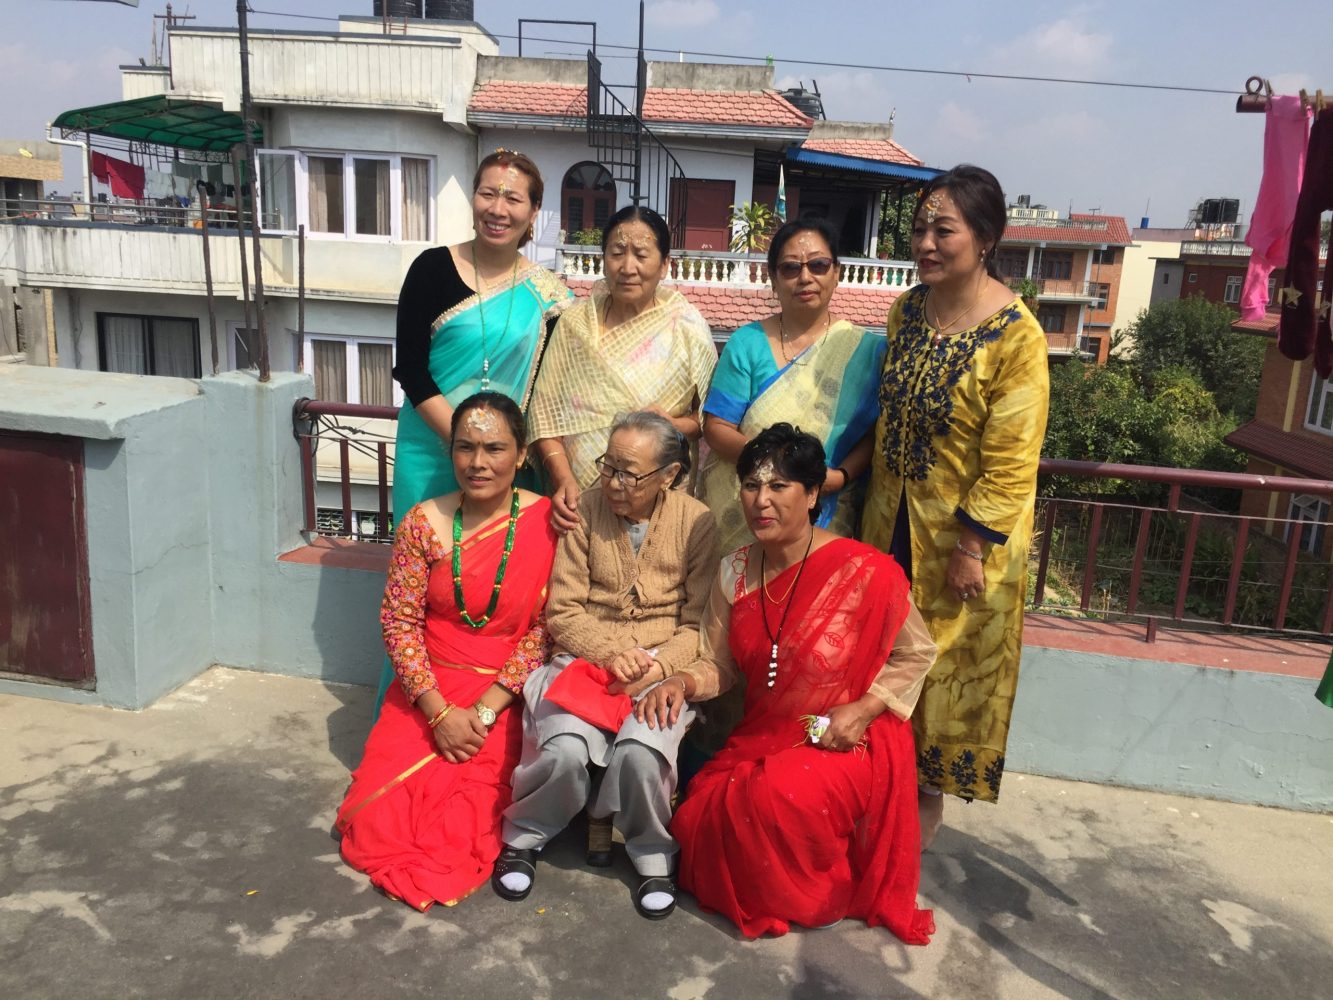 Family gathering during Dashain Festival in Nepal